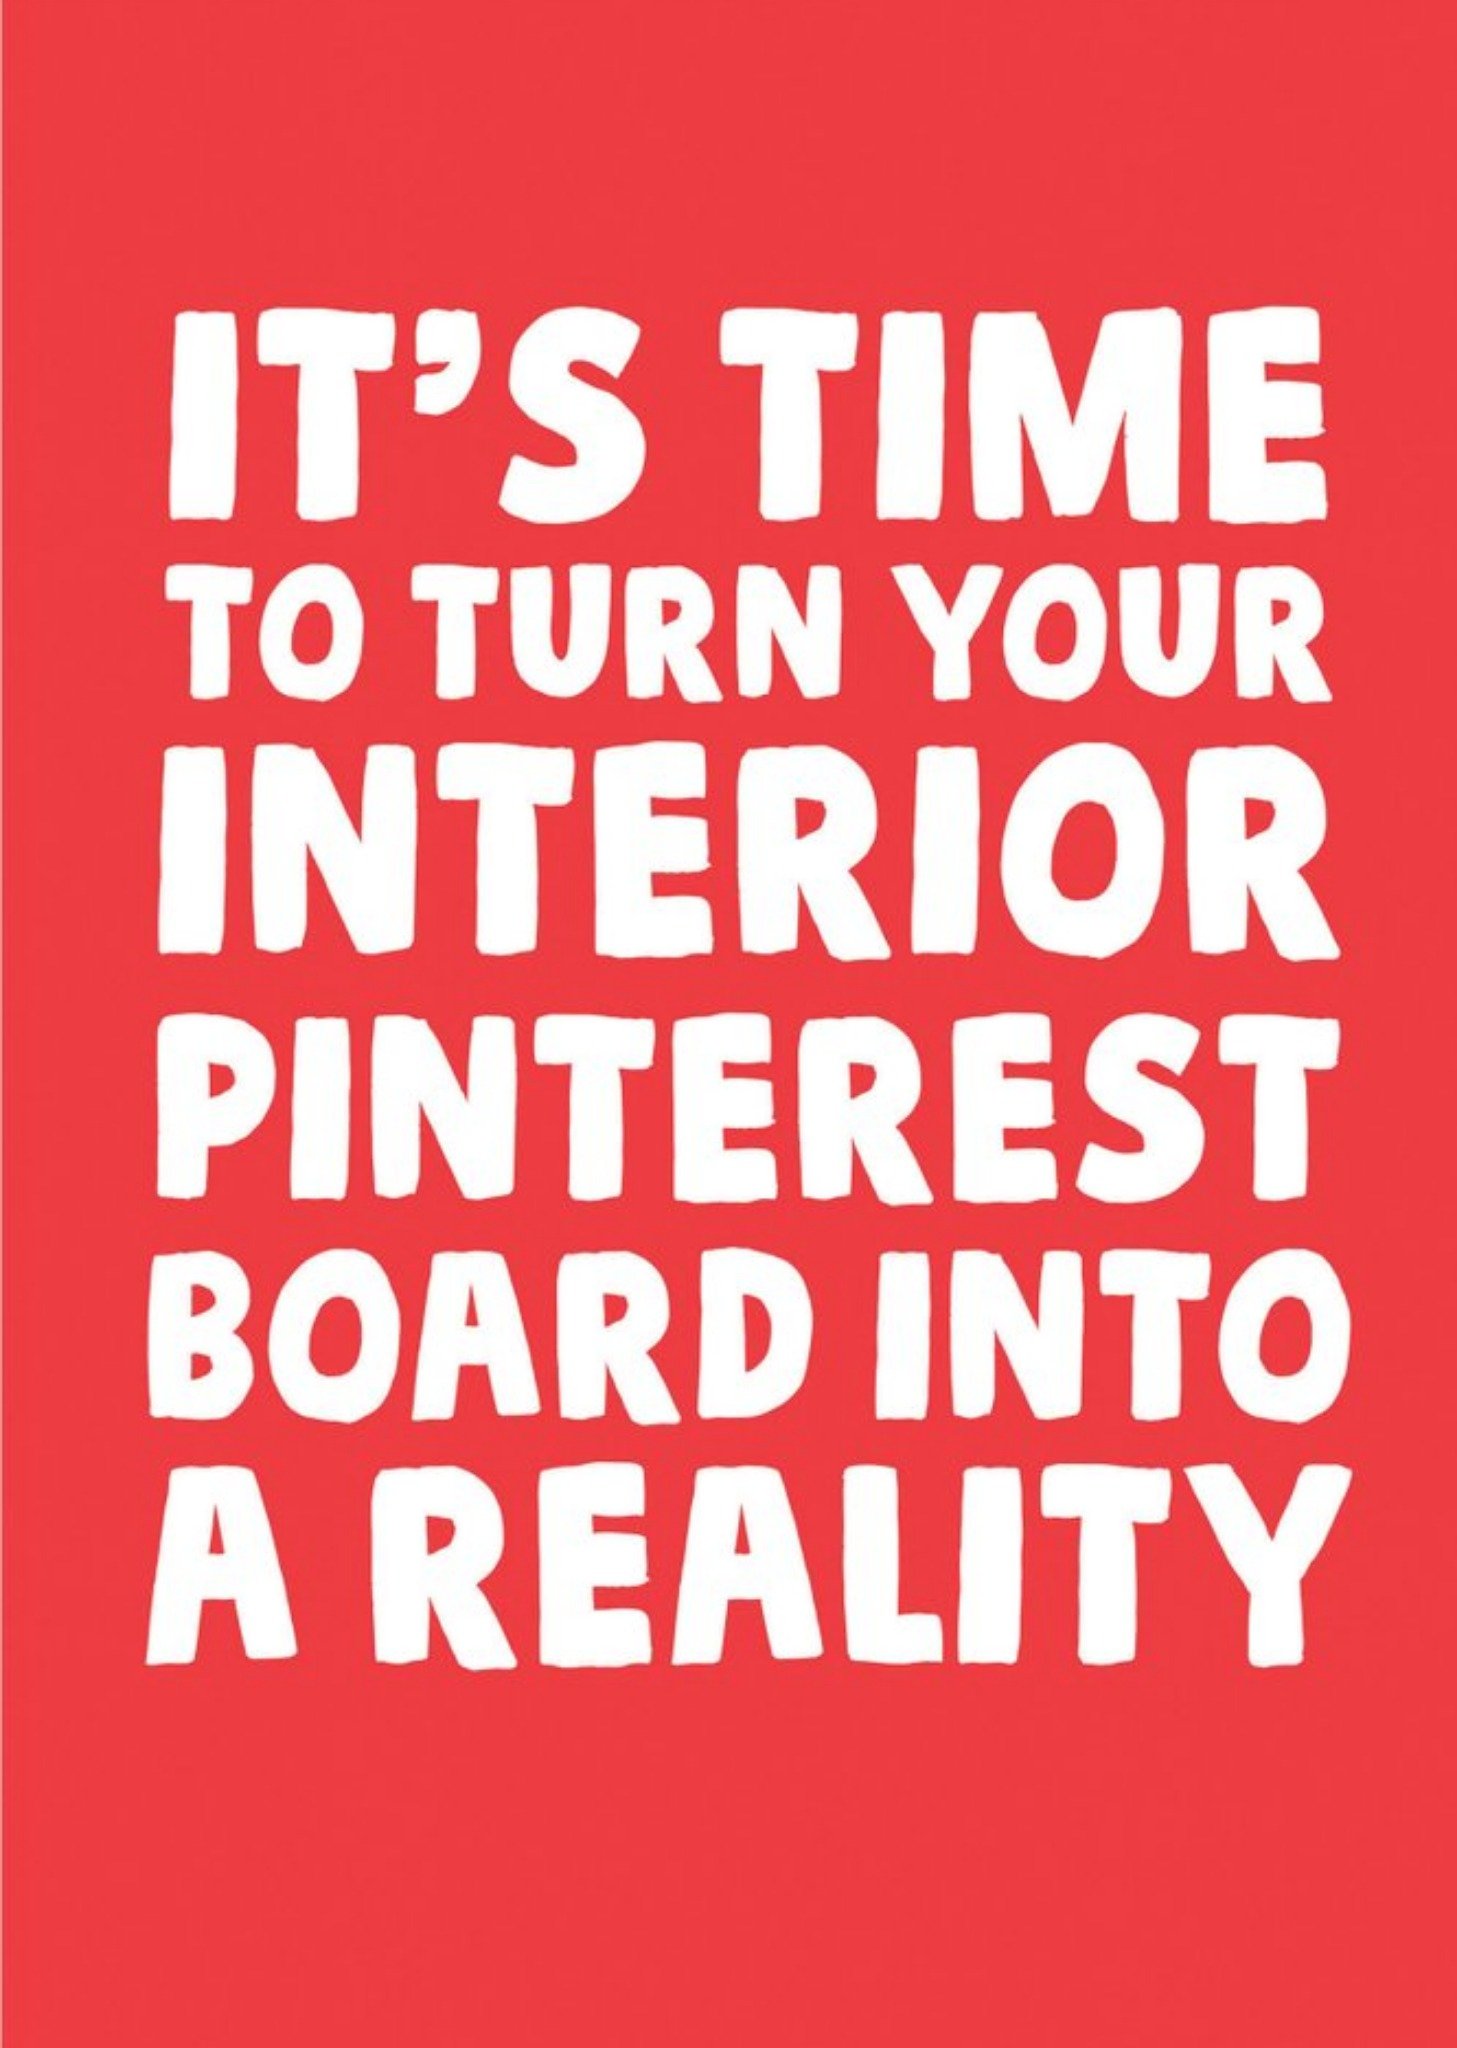 Other Funny Time To Turn Your Interior Pinterest Board Into A Reality New Home Card Ecard